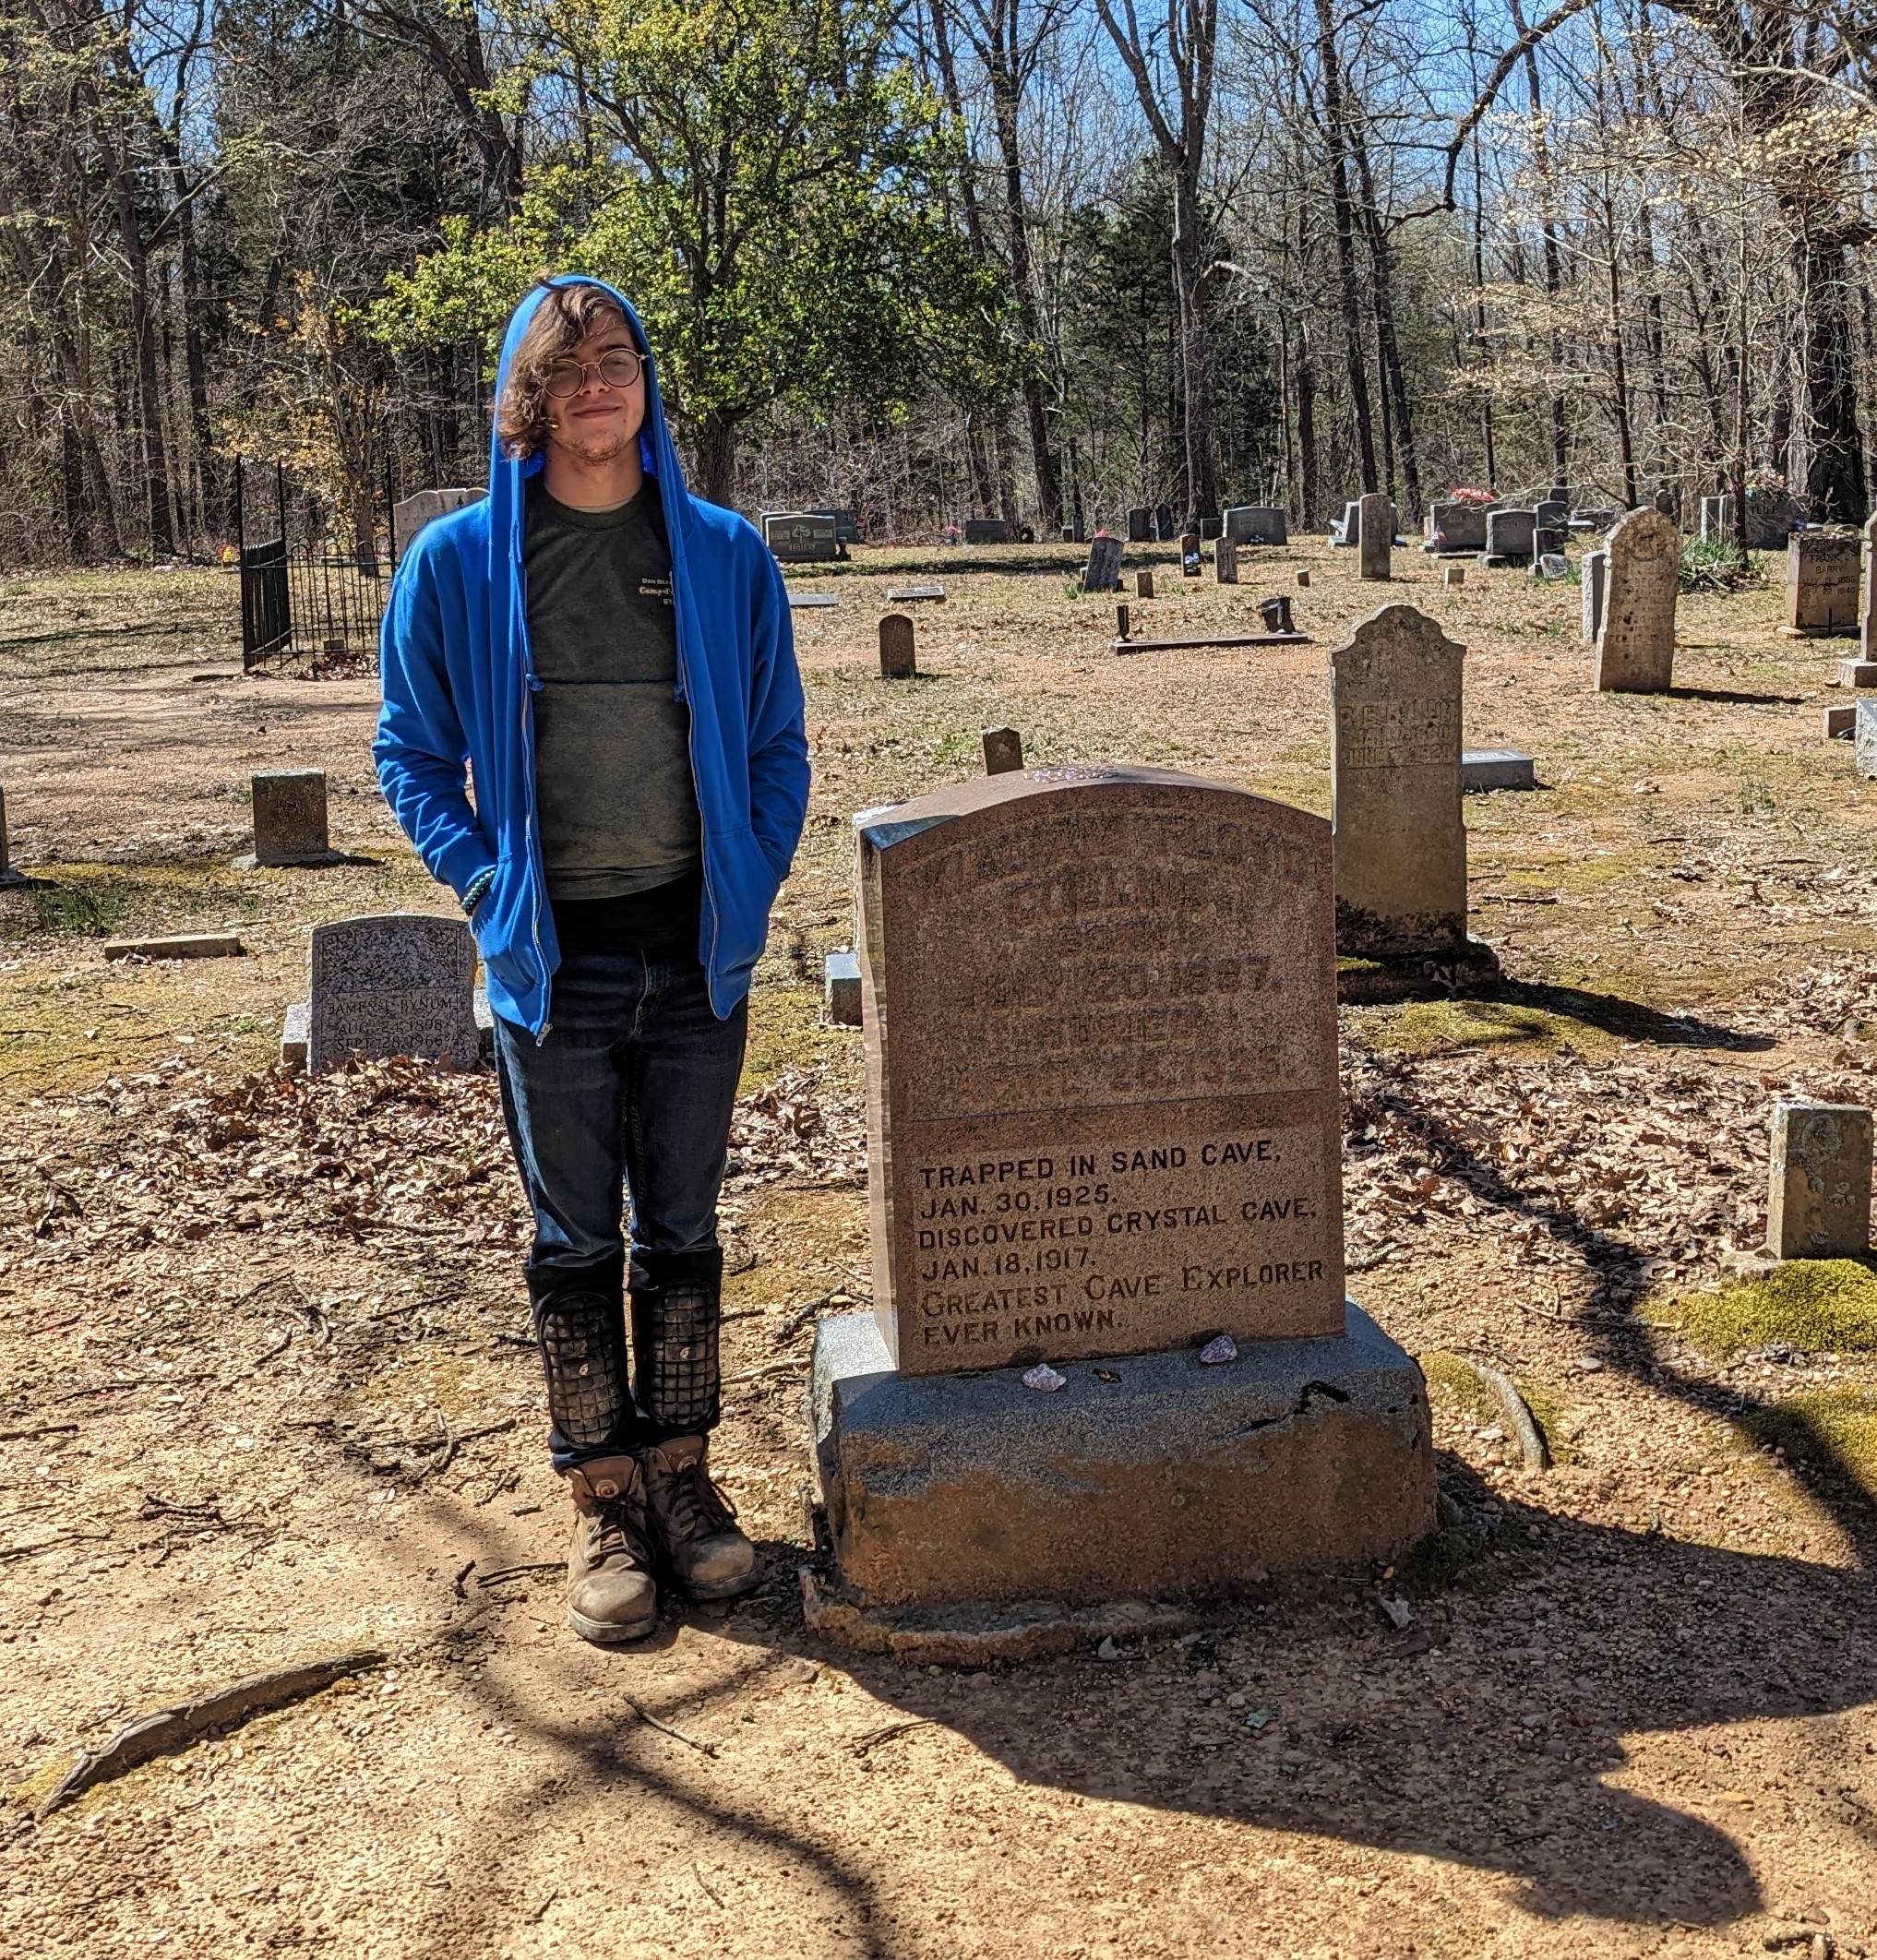 NKU Student at Mammoth Cave Cemetery